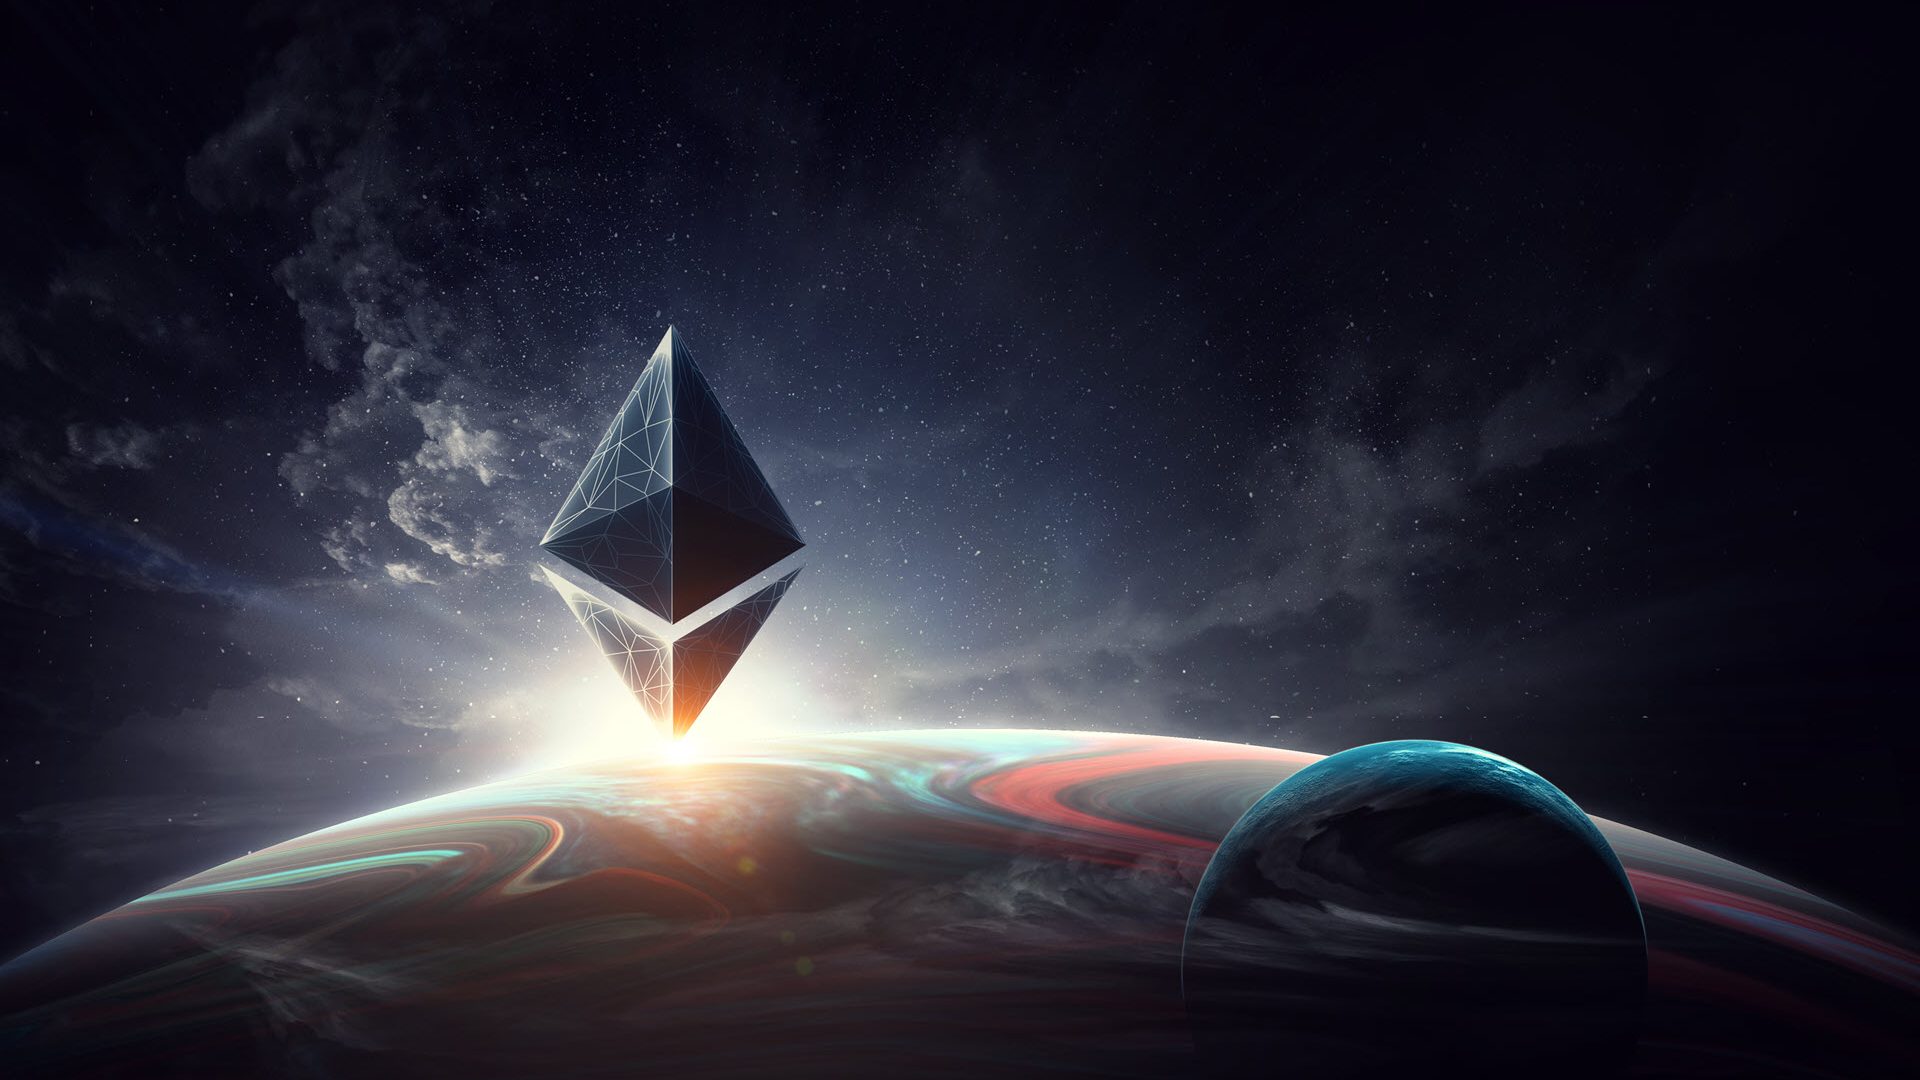 Ethereum Cryptocurrency Wallpapers